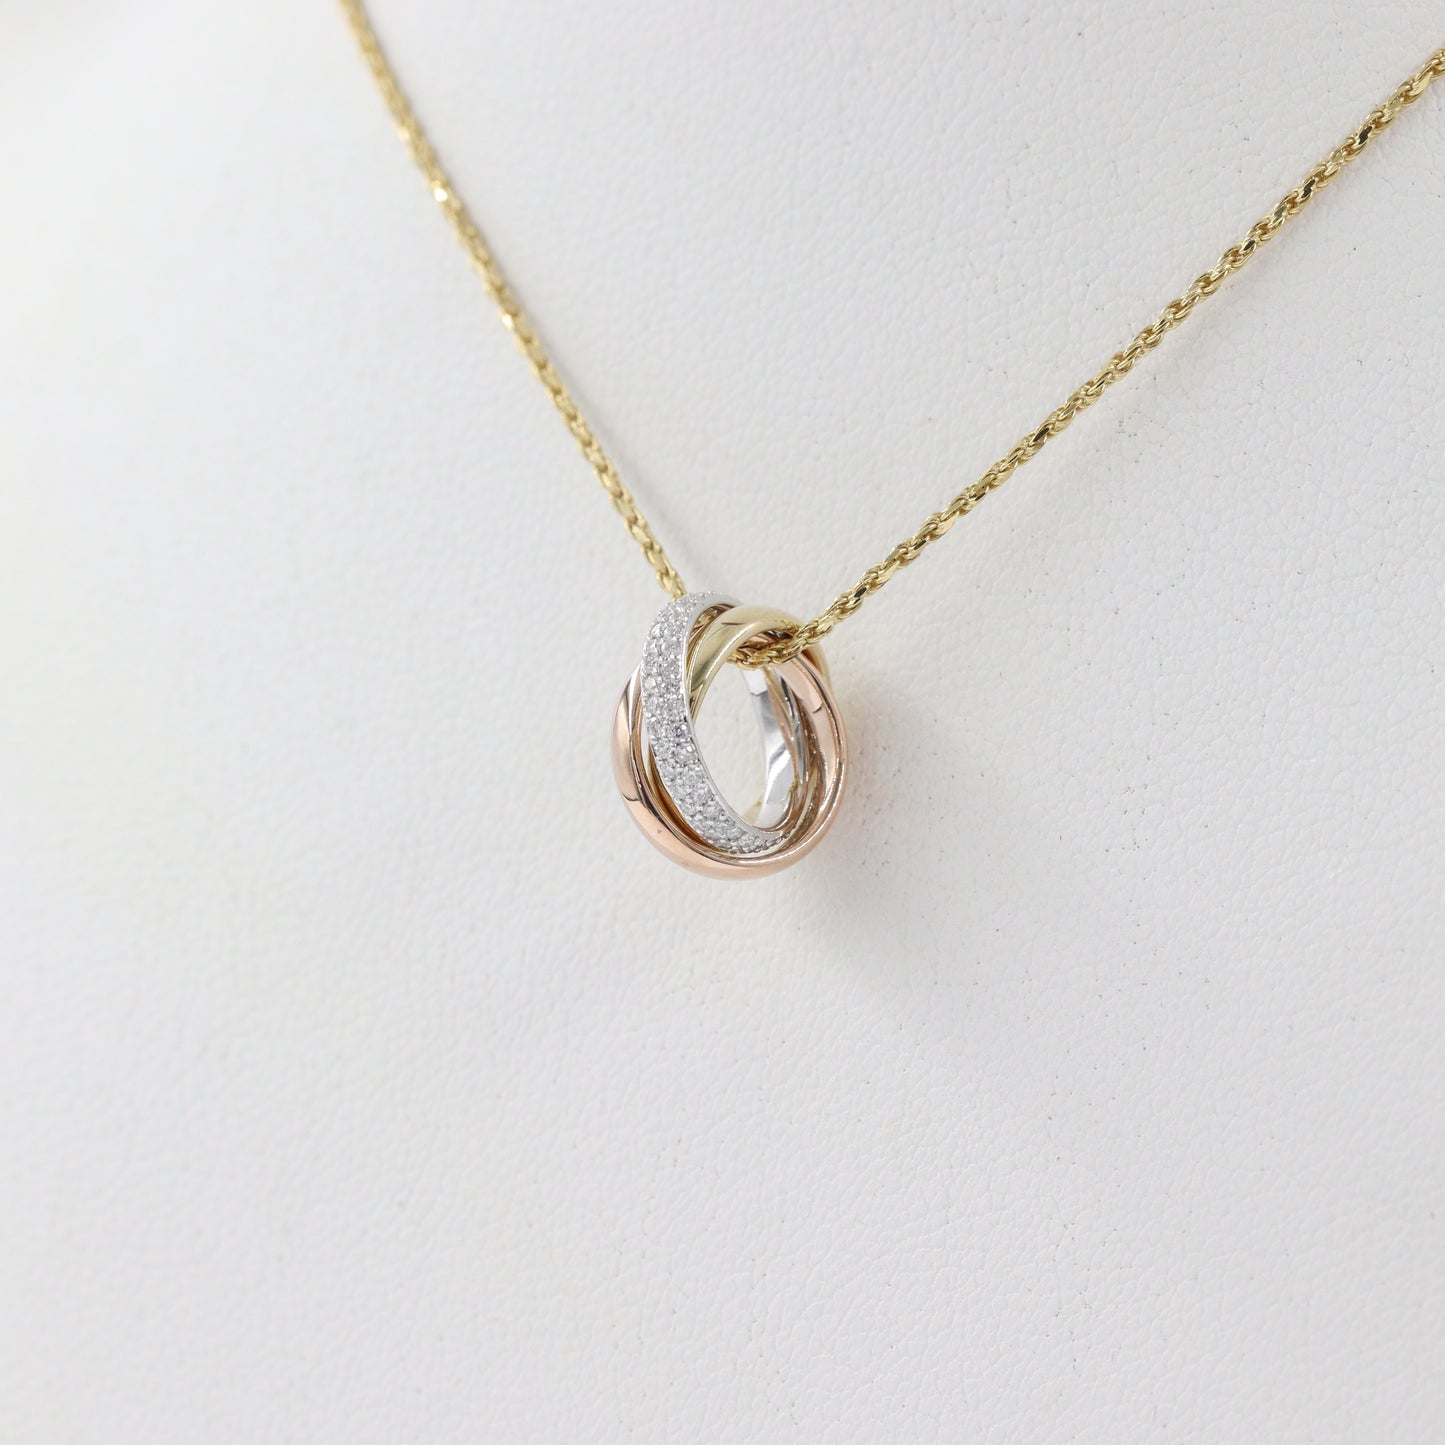 Trinity Diamond Necklace with Rope Chain/ Small Circle Pendant /14K Gold Necklace/ Luxury Necklace/ Gift for Her/ Anniversary Gift